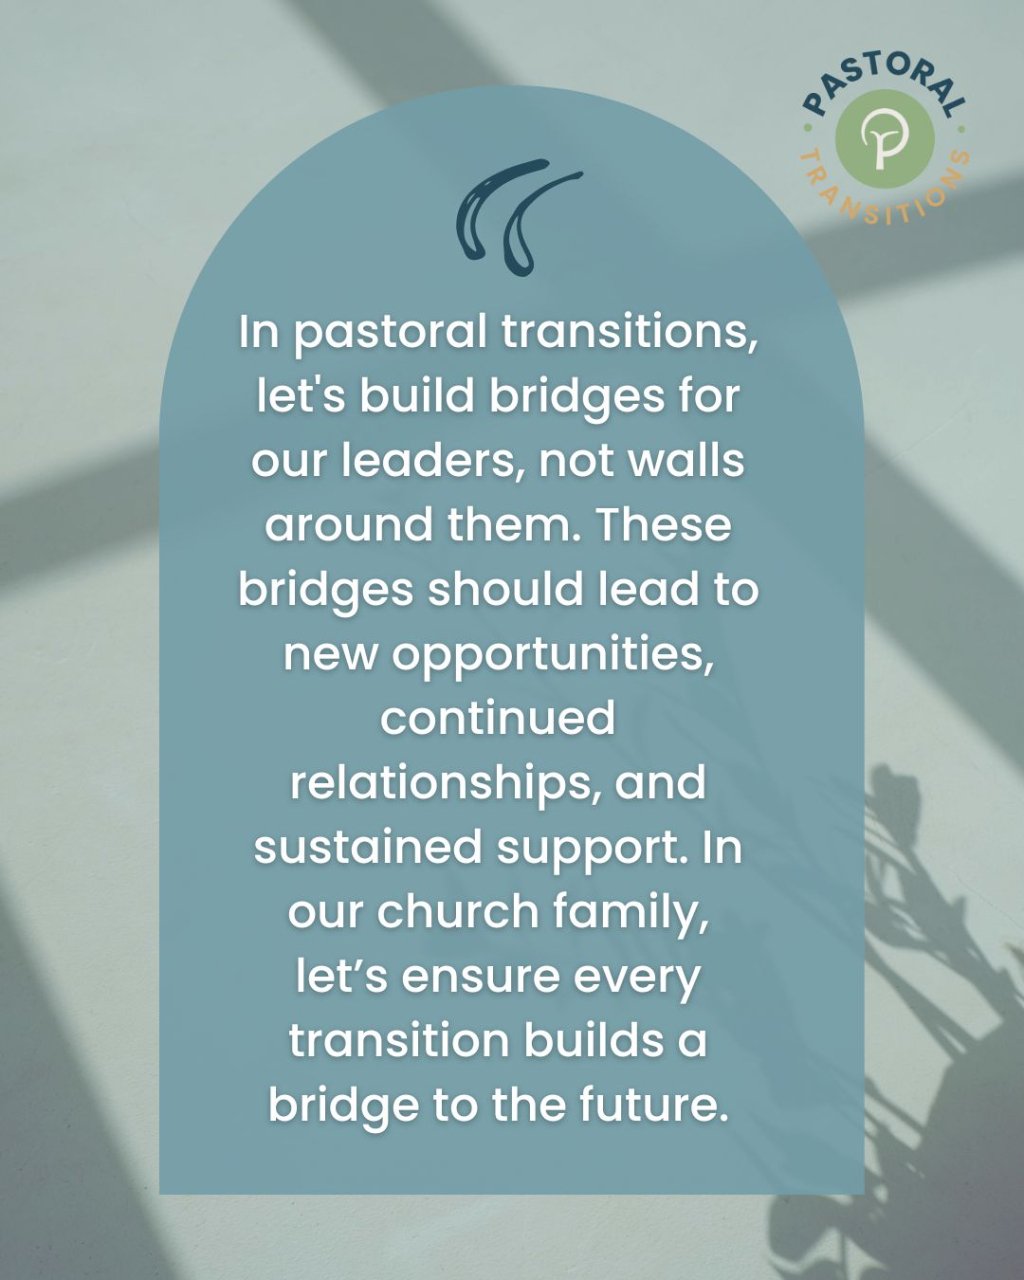 Building bridges, not walls, in transitions. 

Join us! Let's change the face and future of transition in ministry! 

#pastoraltransitions #pastoralsupport #lovecanbuildabridge